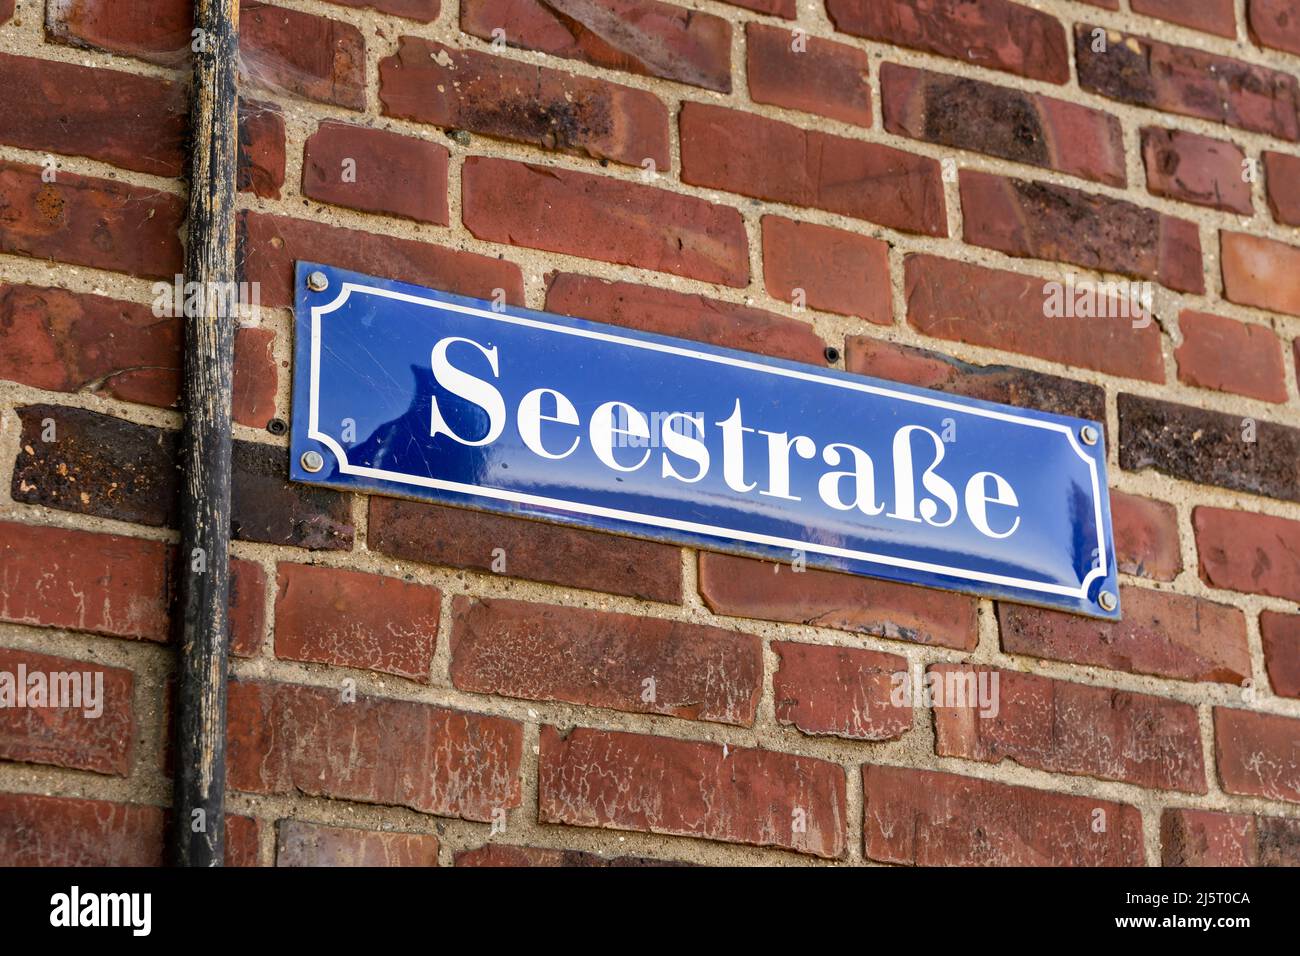 Seestrasse road sign on a red brick wall in Germany. White letters on a blue metal plate. Weathered grungy wall with dirt and cobwebs. Building Stock Photo